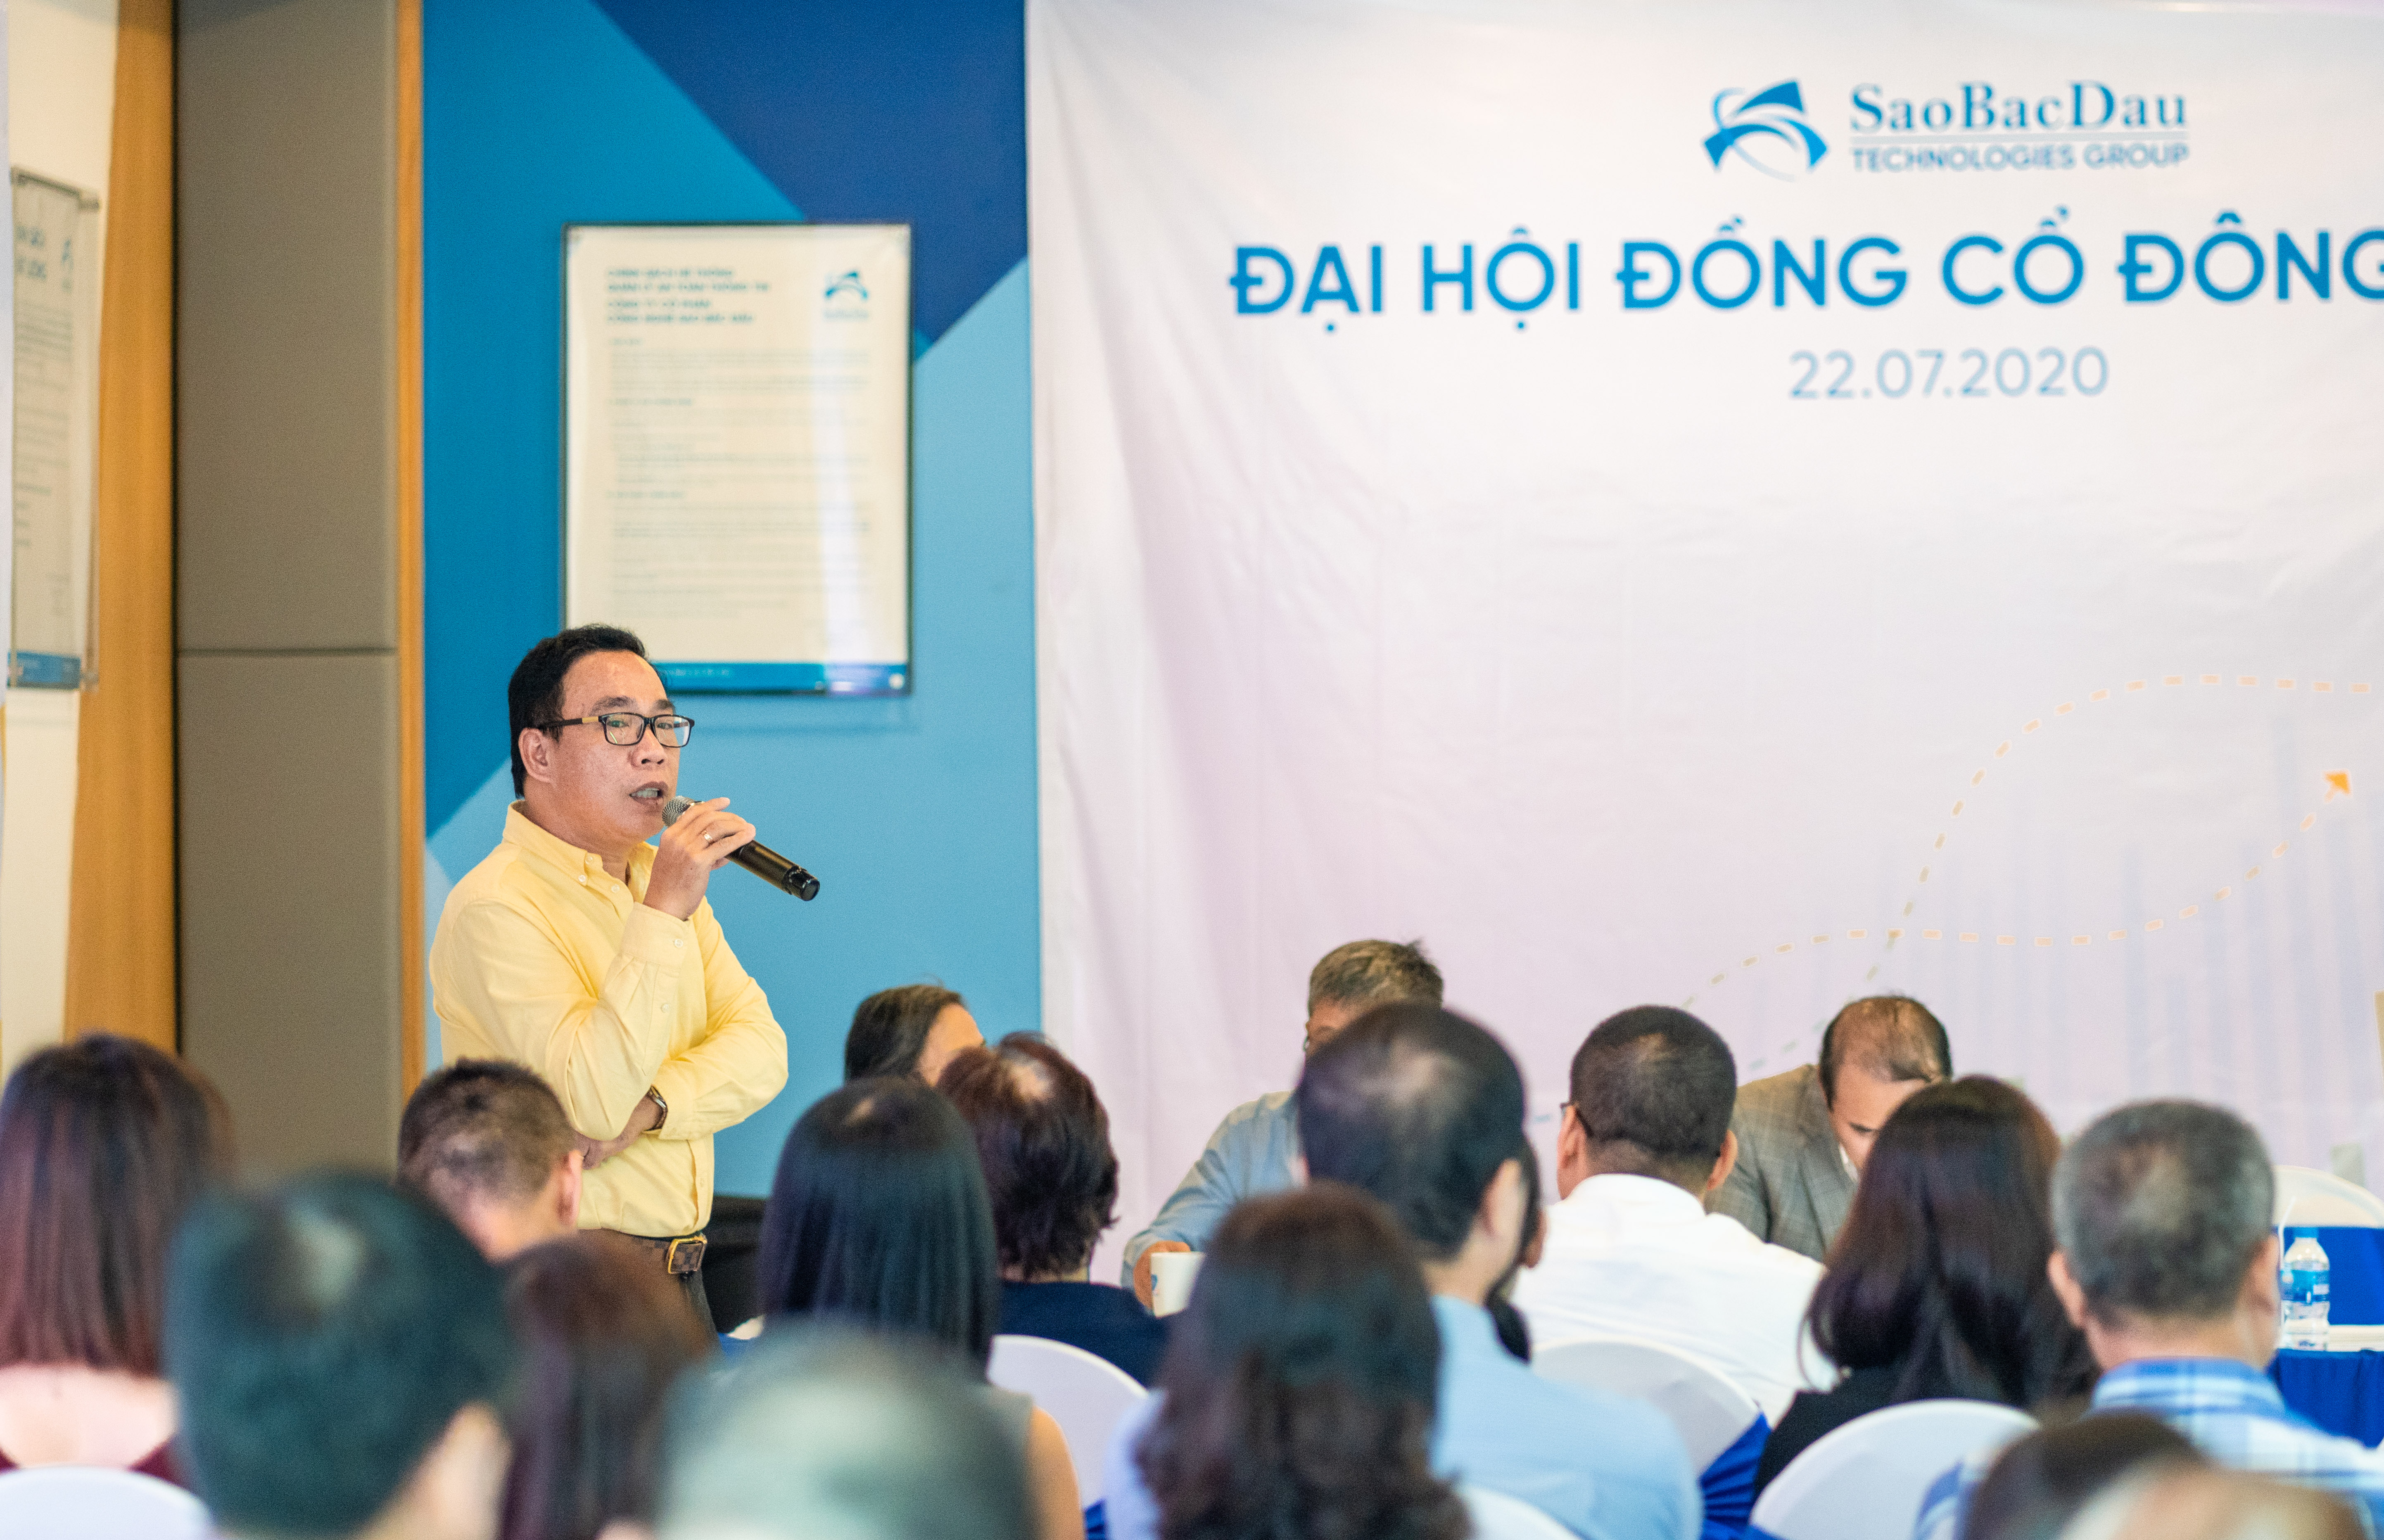 Sao Bac Dau has sustainable Growth Rate in the Financial Year of 2019-2020